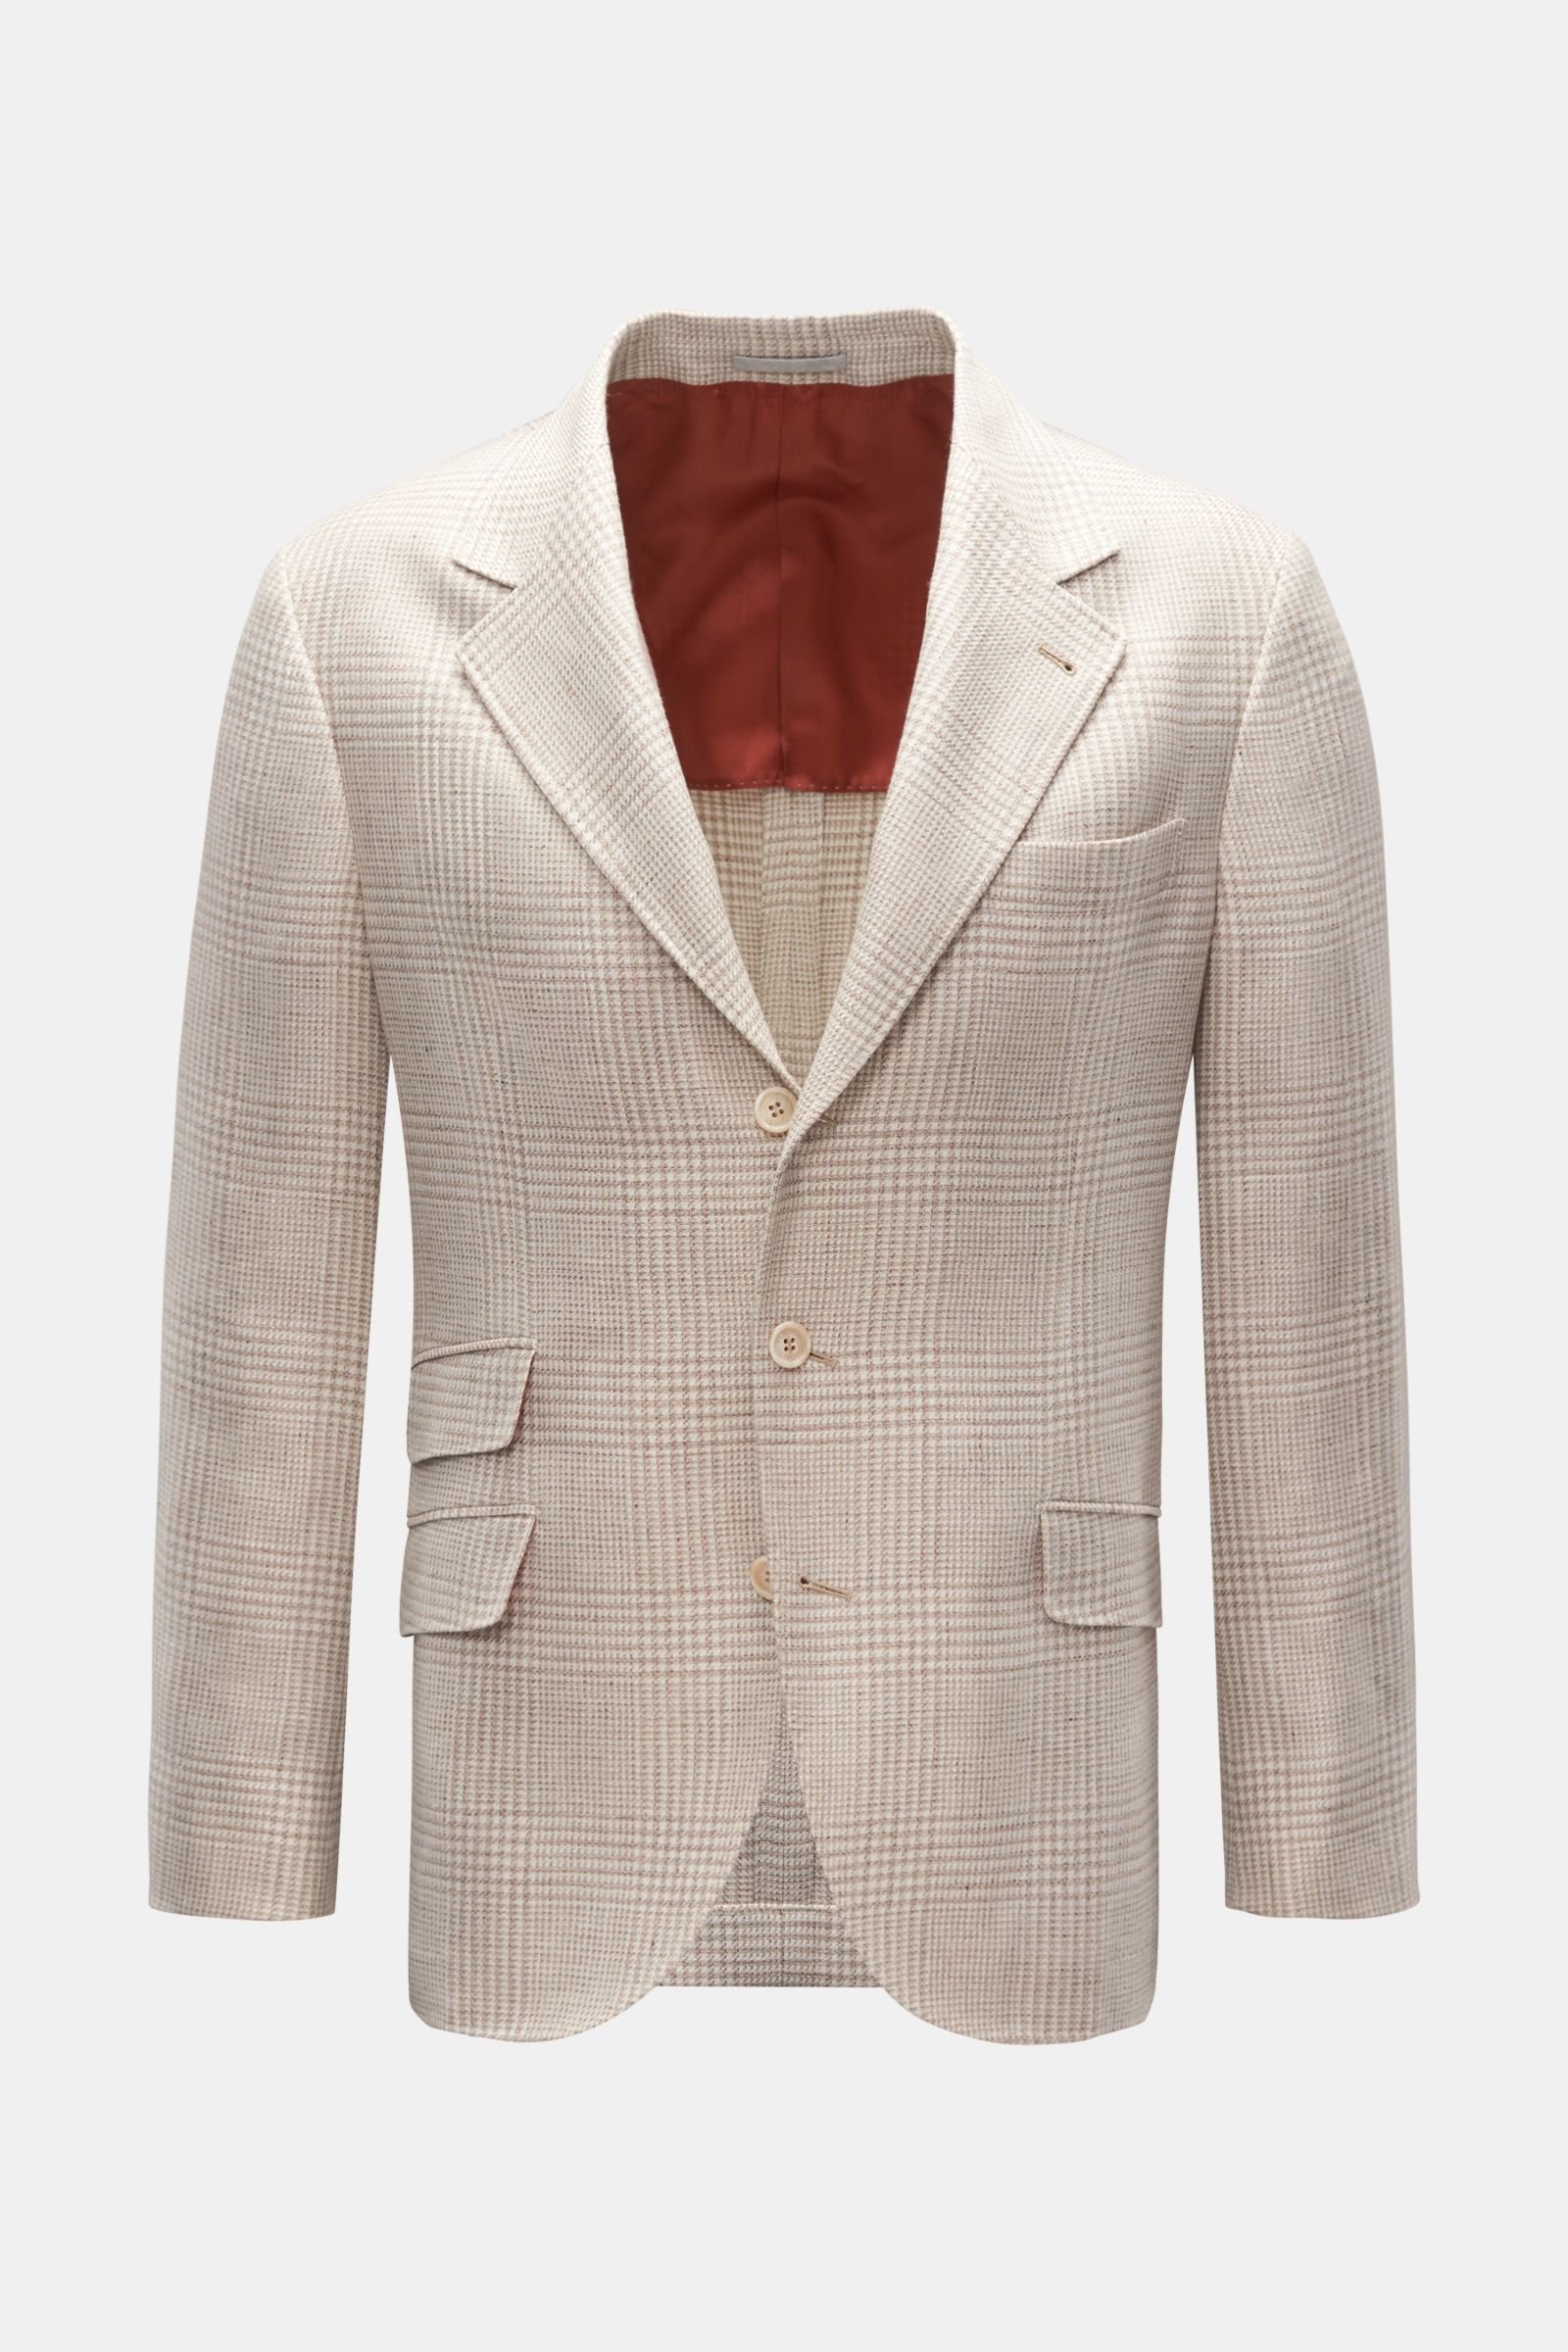 Smart-casual jacket beige/cream checked